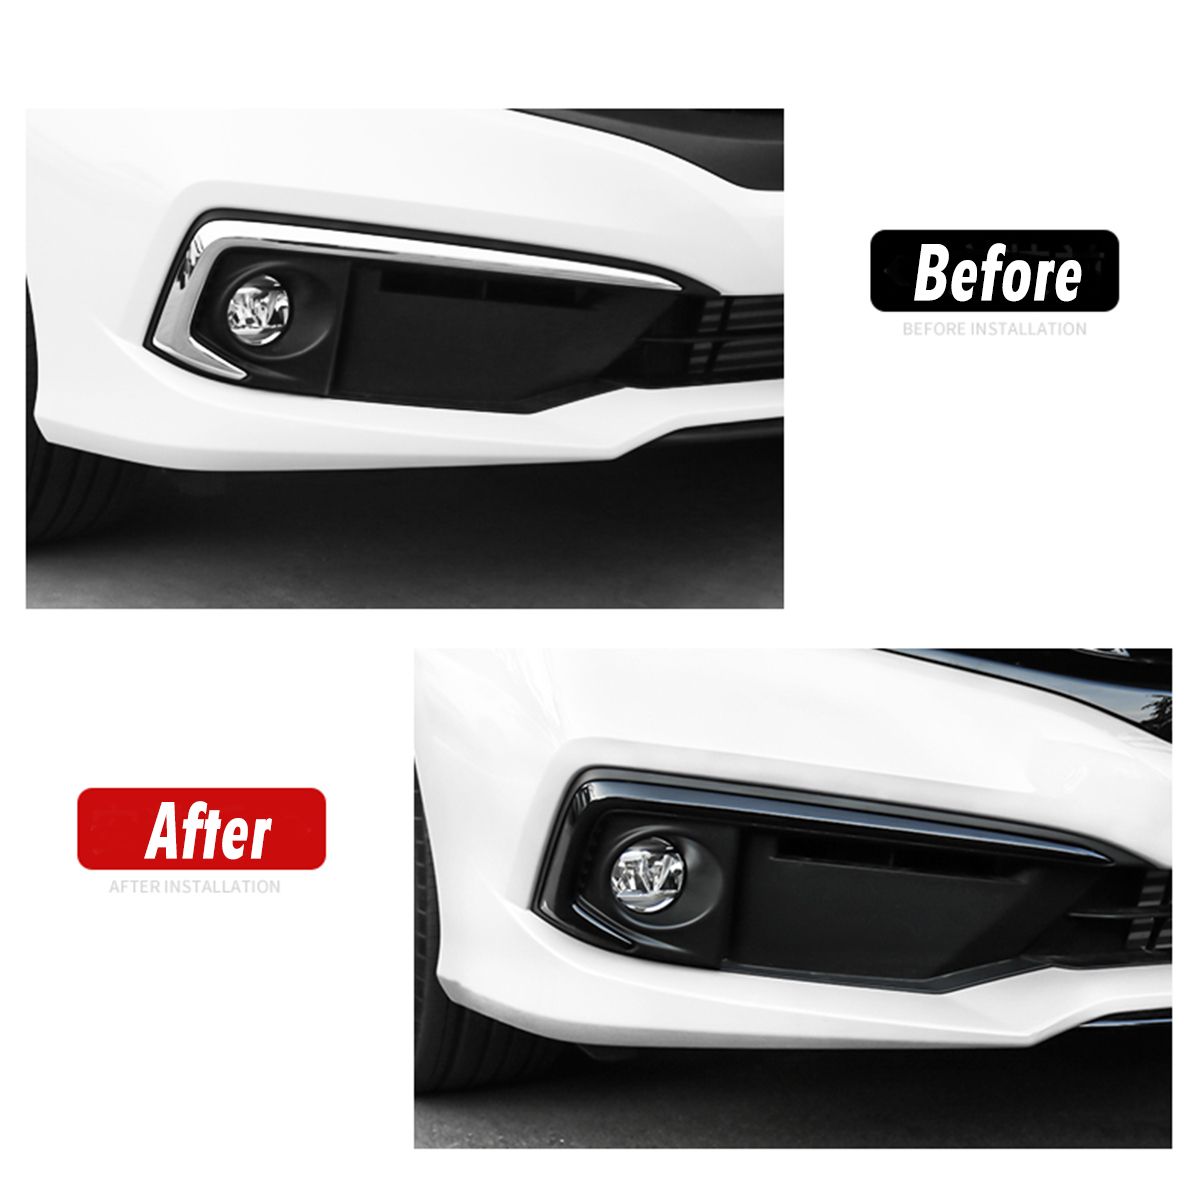 Glossy-Black-Style-Front-Fog-Light-Eyebrow-Cover-Trim-For-Honda-Civic-2019-Up-1631084